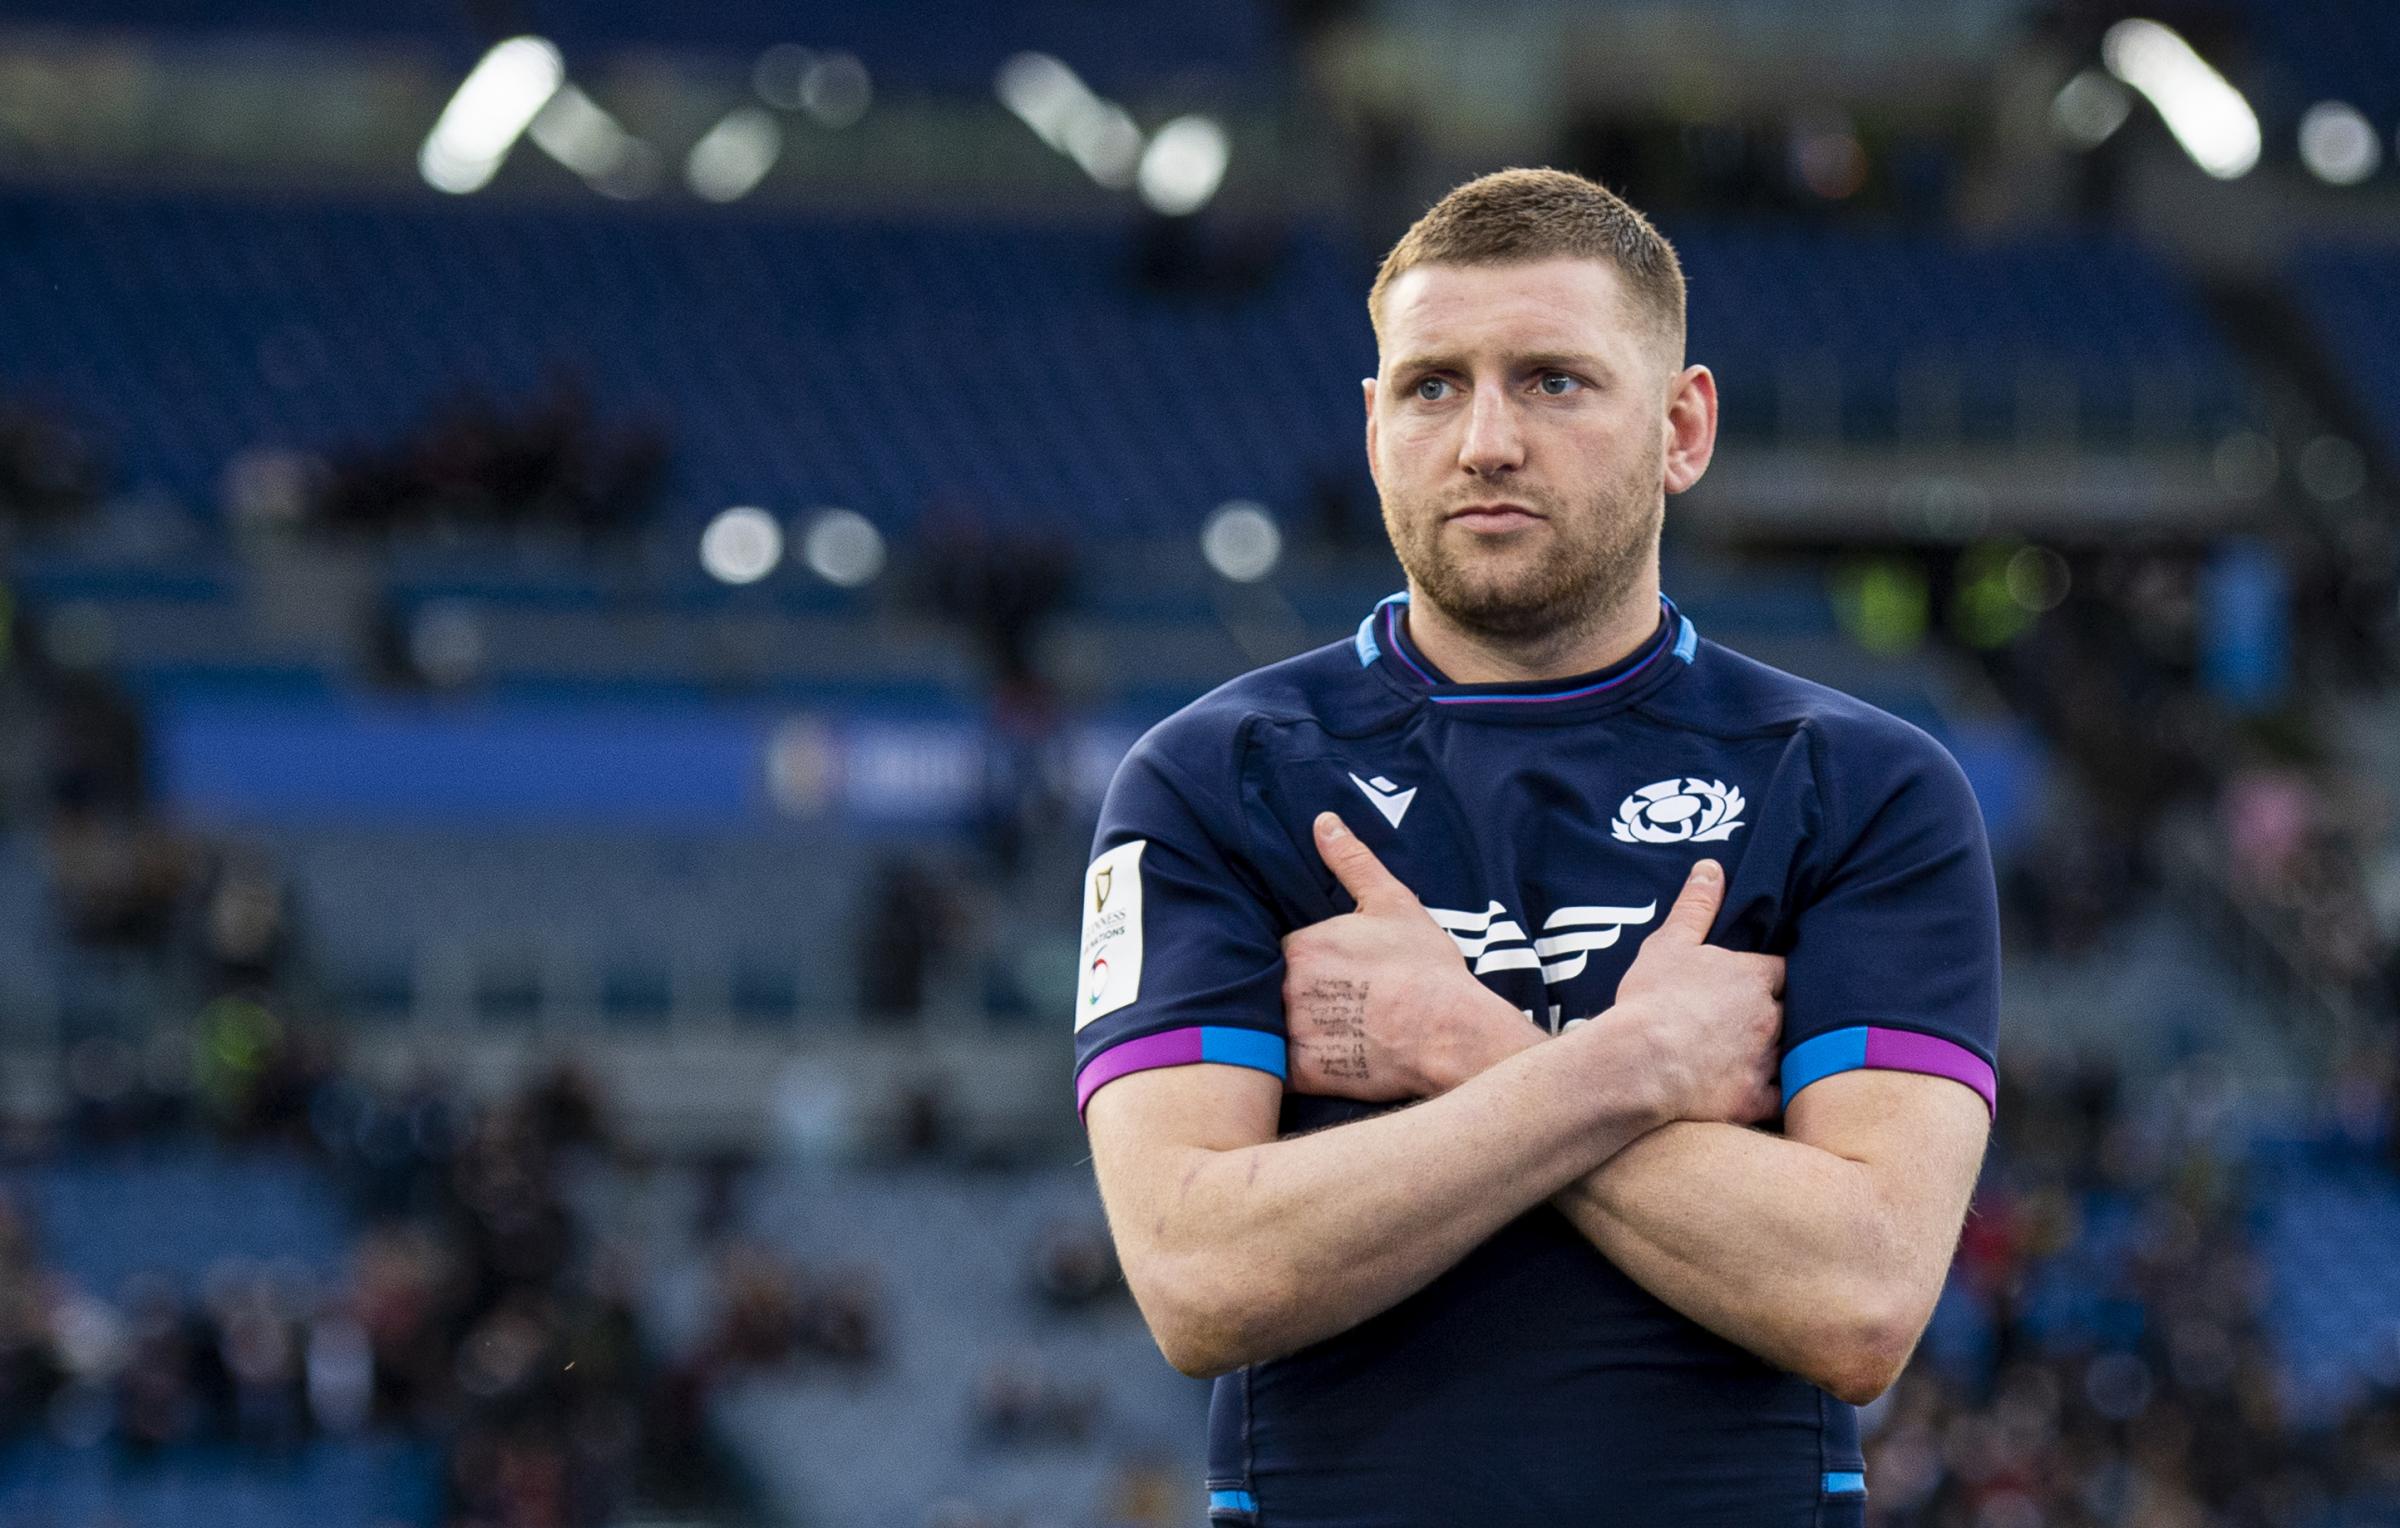 Scotland fly-half Finn Russell has had a frustrating season with the national team